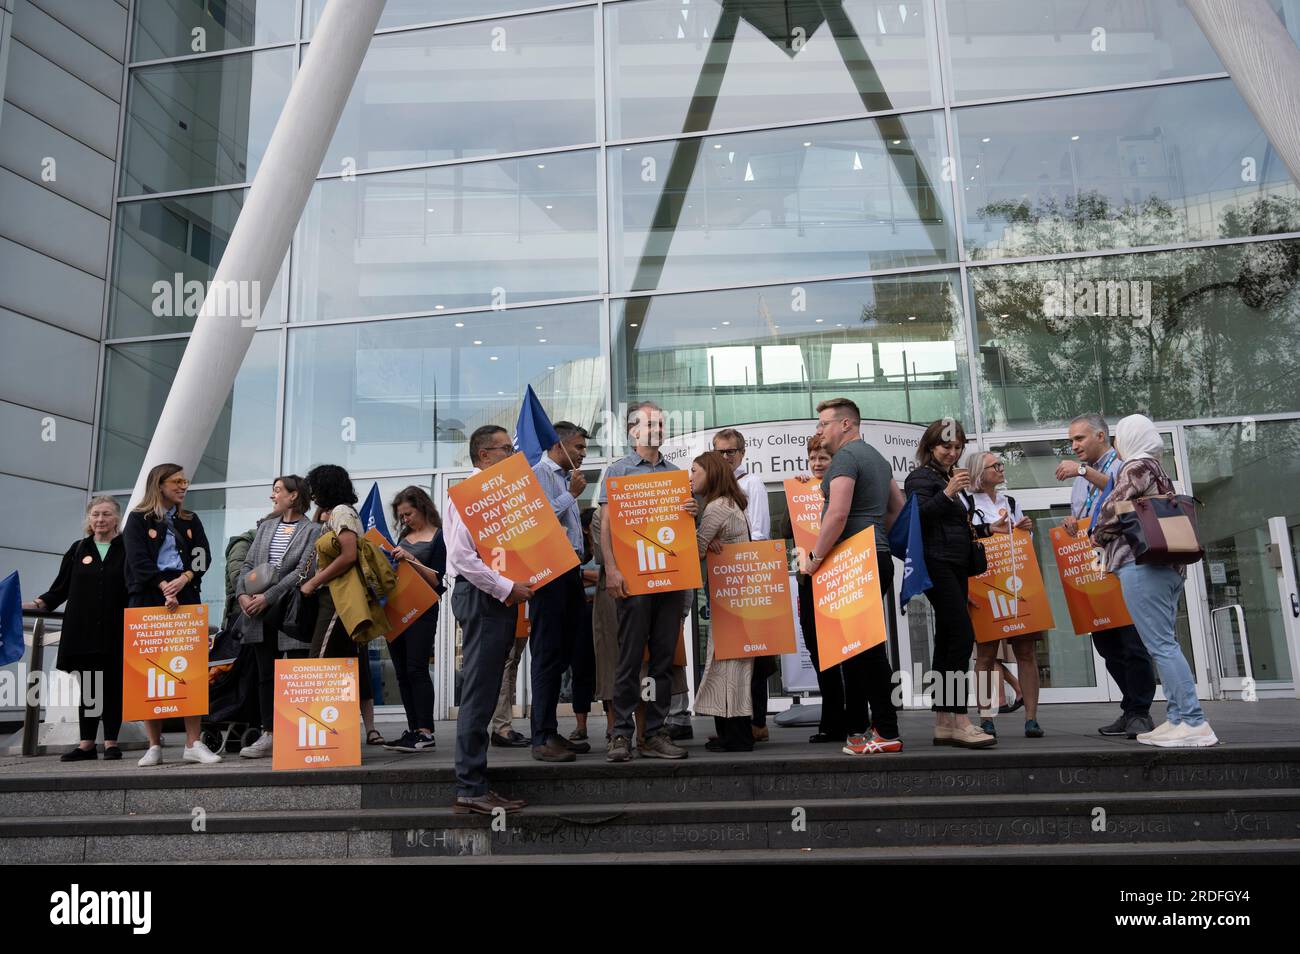 On July 21st 2023 NHS consultants on strike for a second day picket UCH (University College Hospital ) Stock Photo